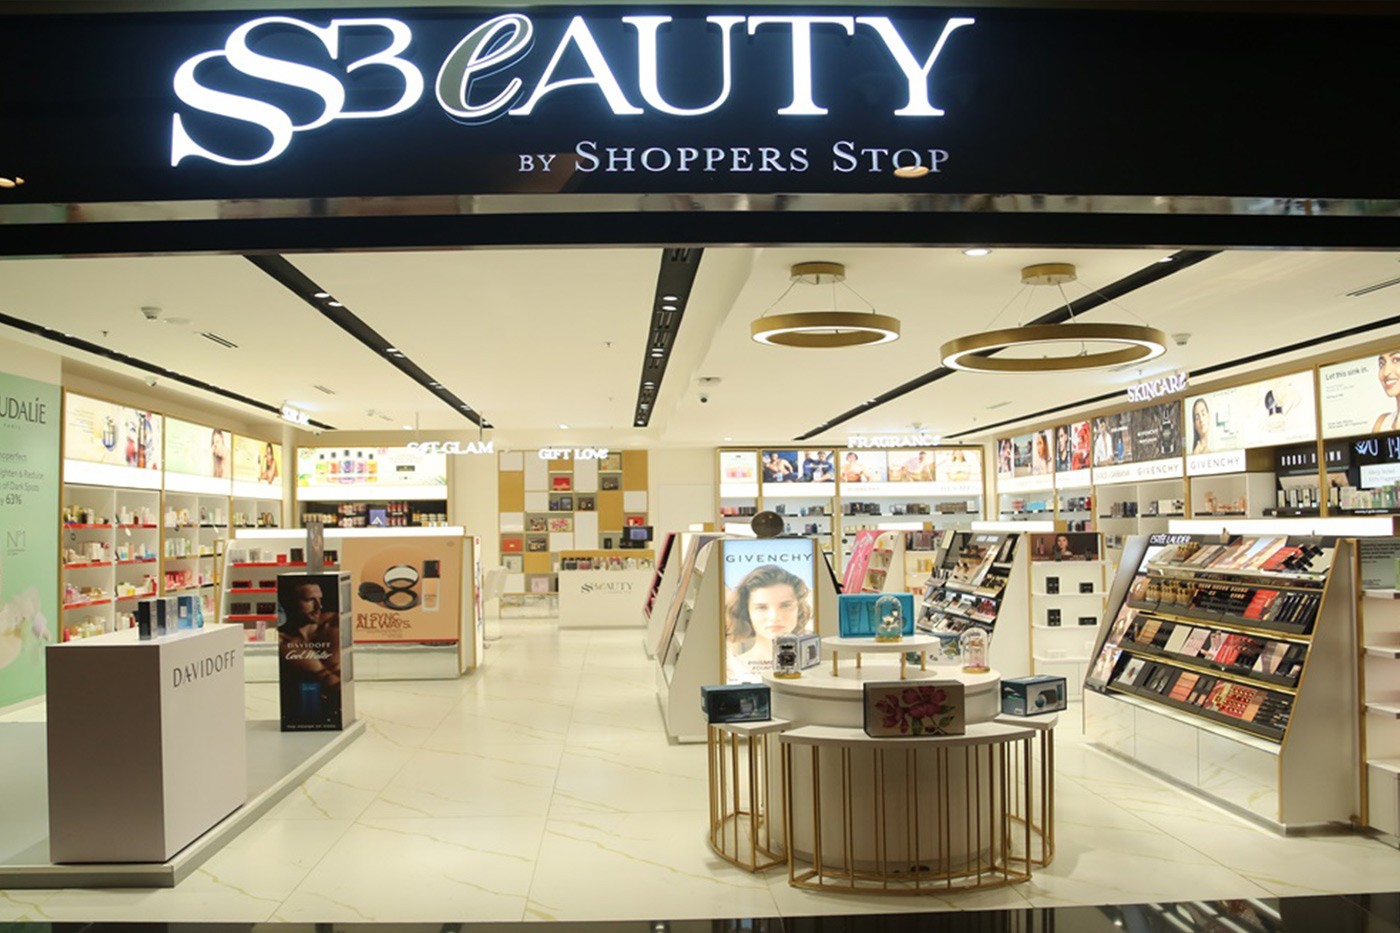 Shoppers Stop intends to start an app for SS Beauty and establish more  outlets. - ReTale News